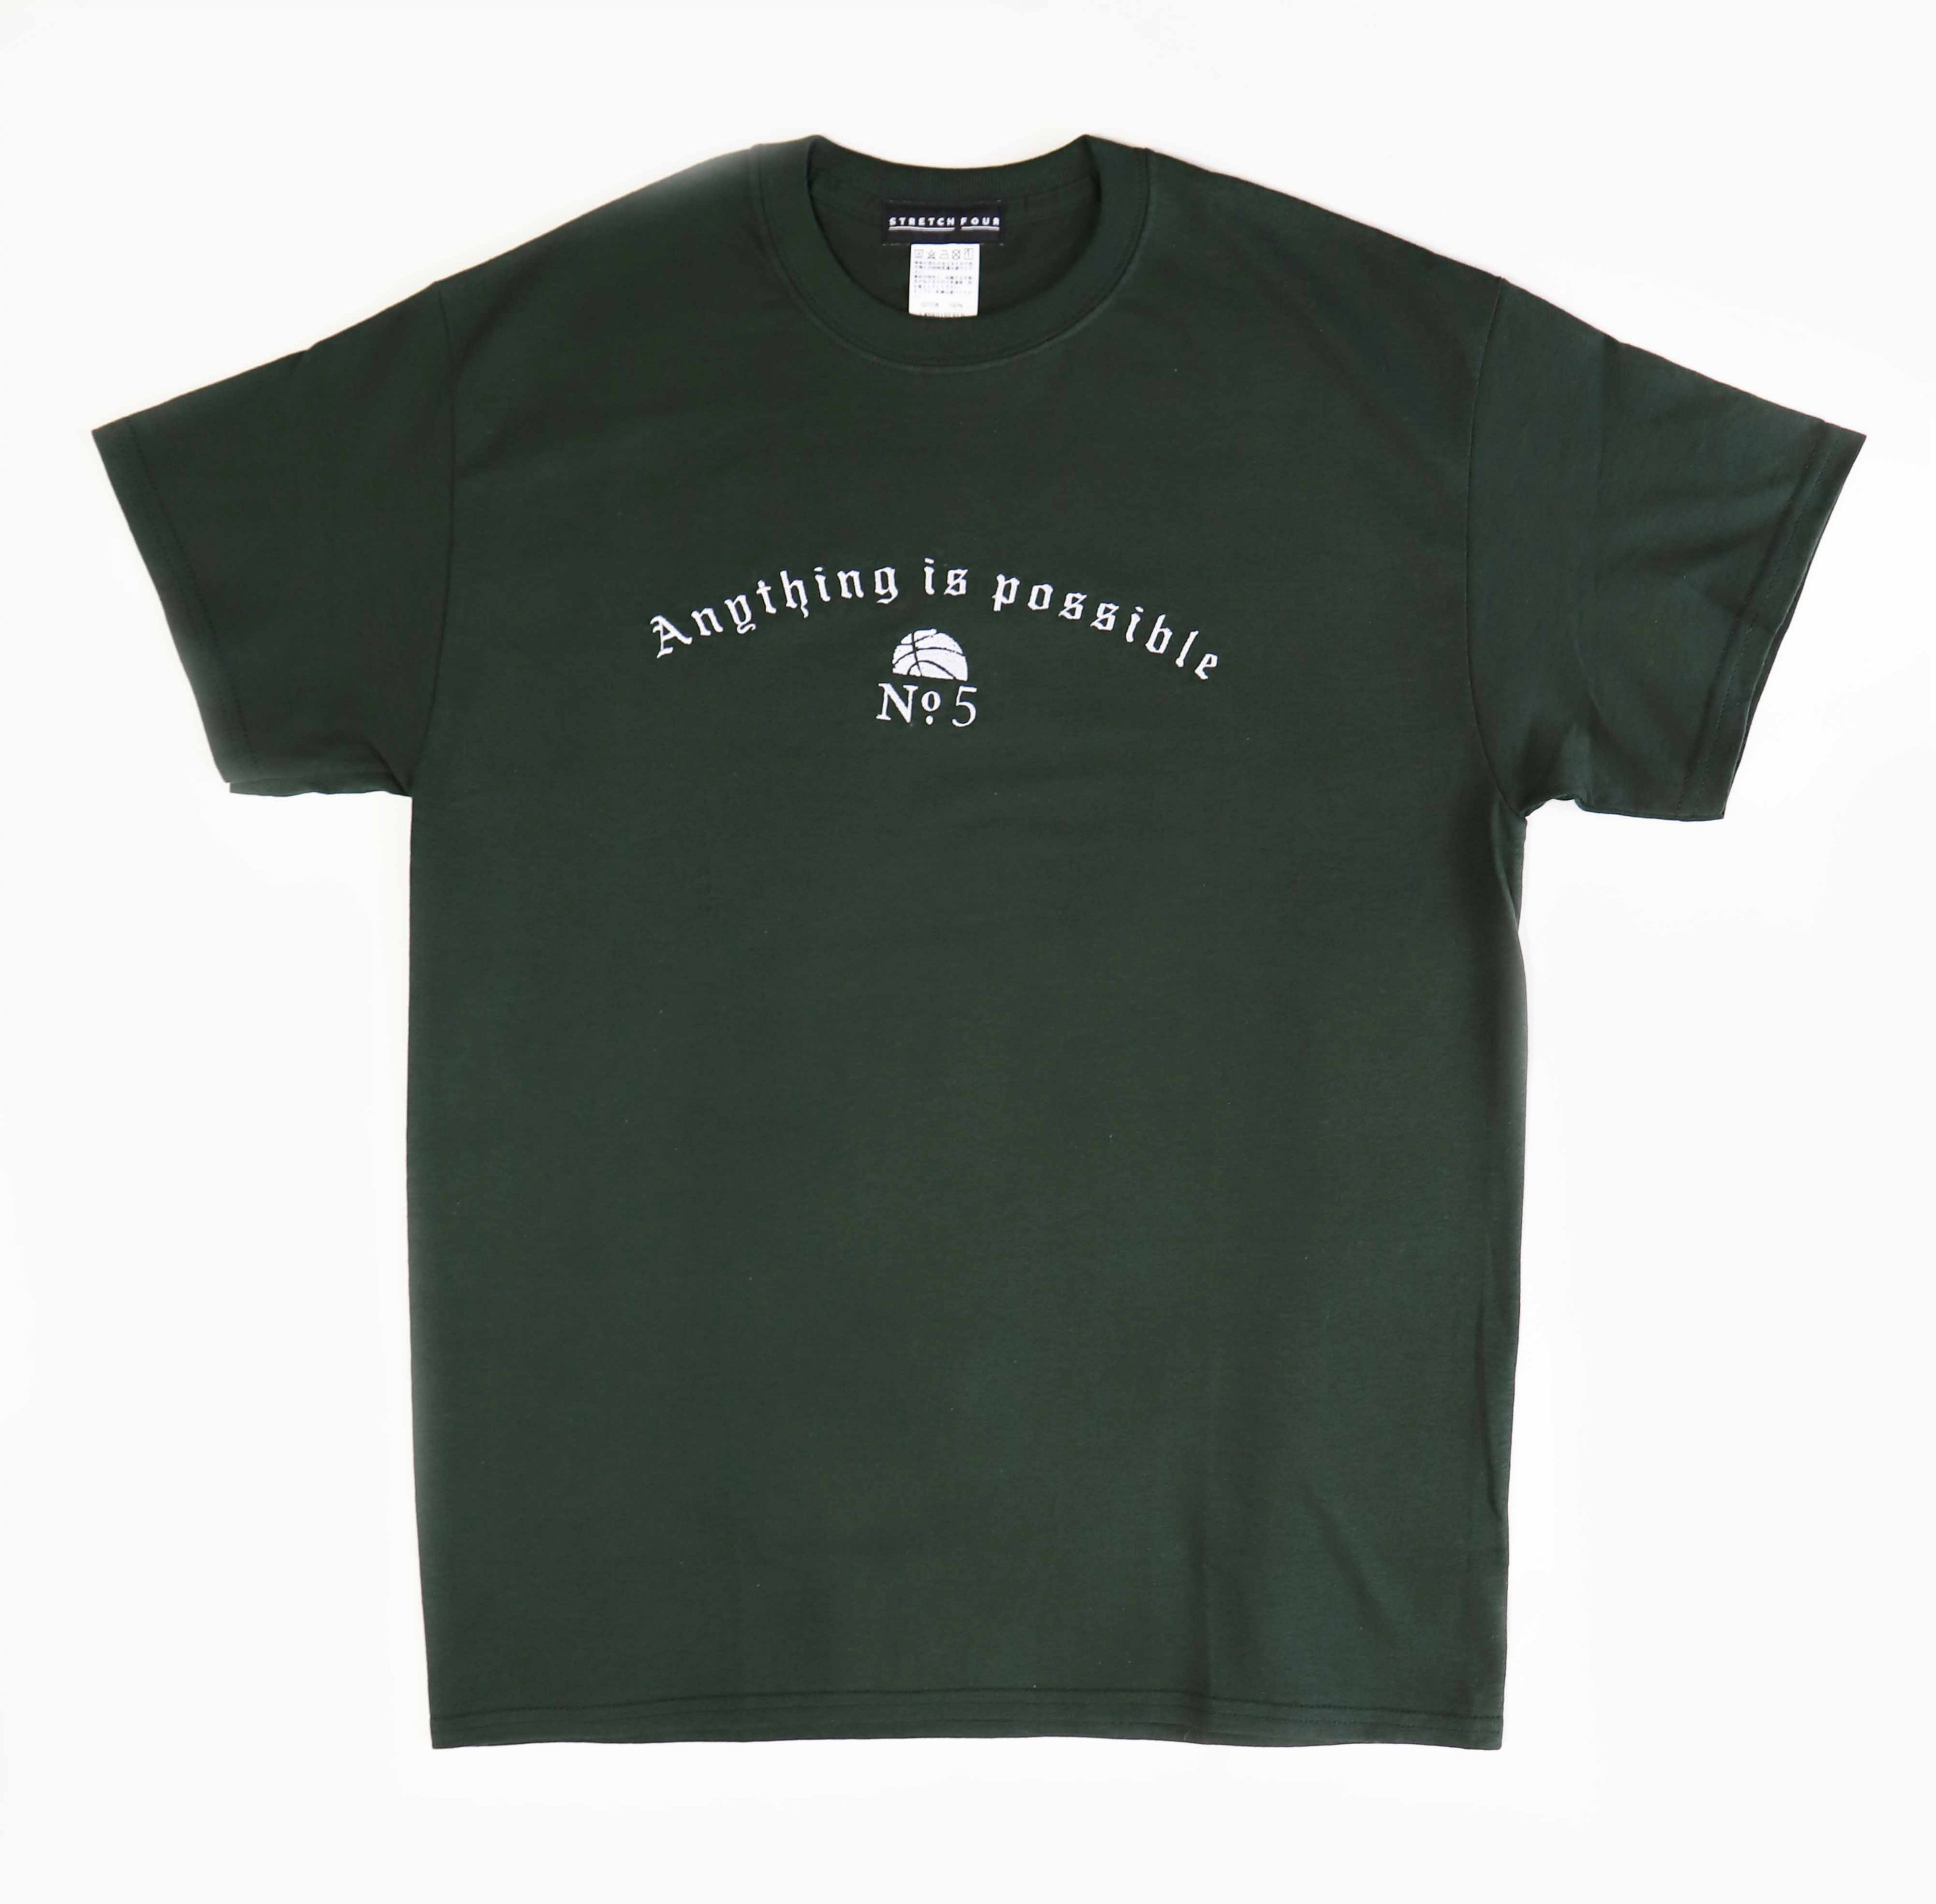 Anything is possible Tee